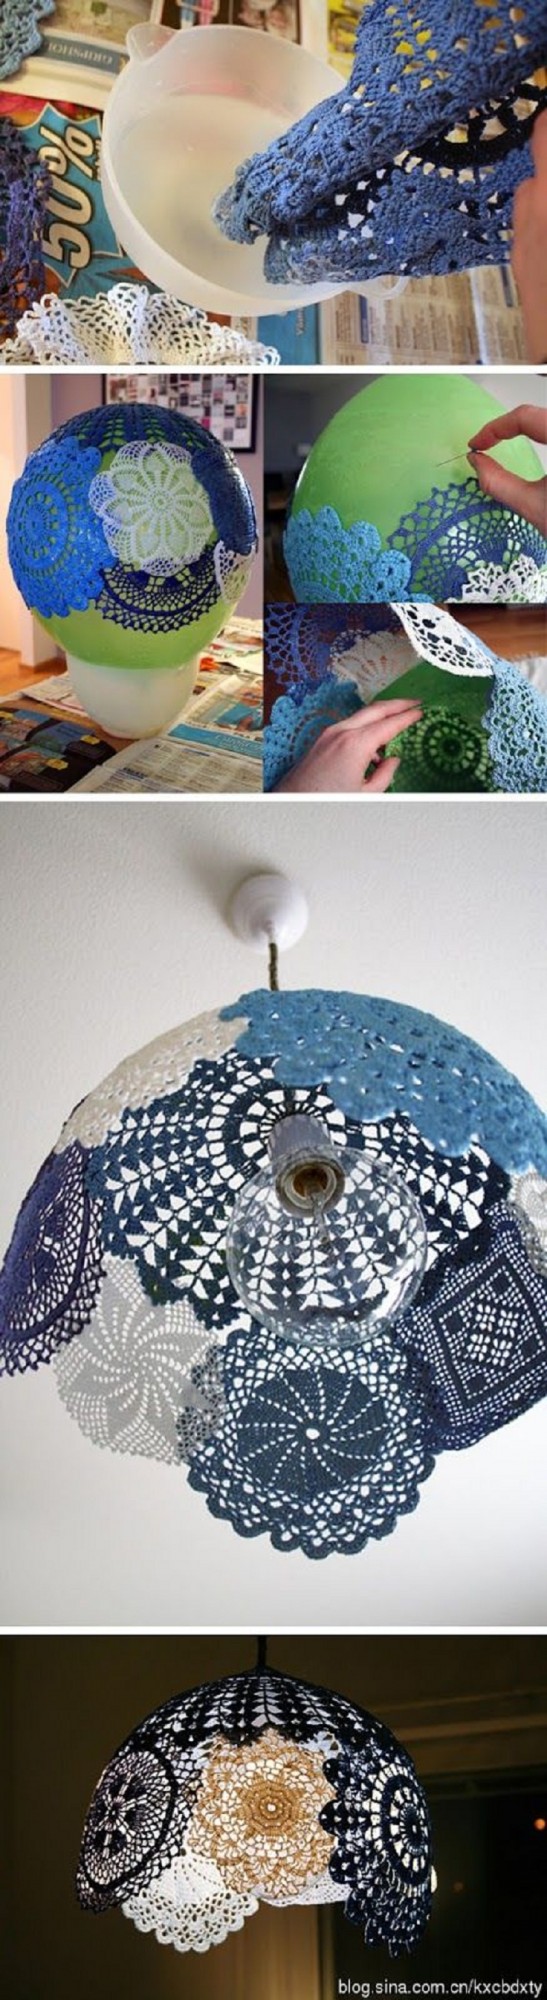 19 The Cheapest And Most Easiest Diy Home Decor Tutorials For Home Spring